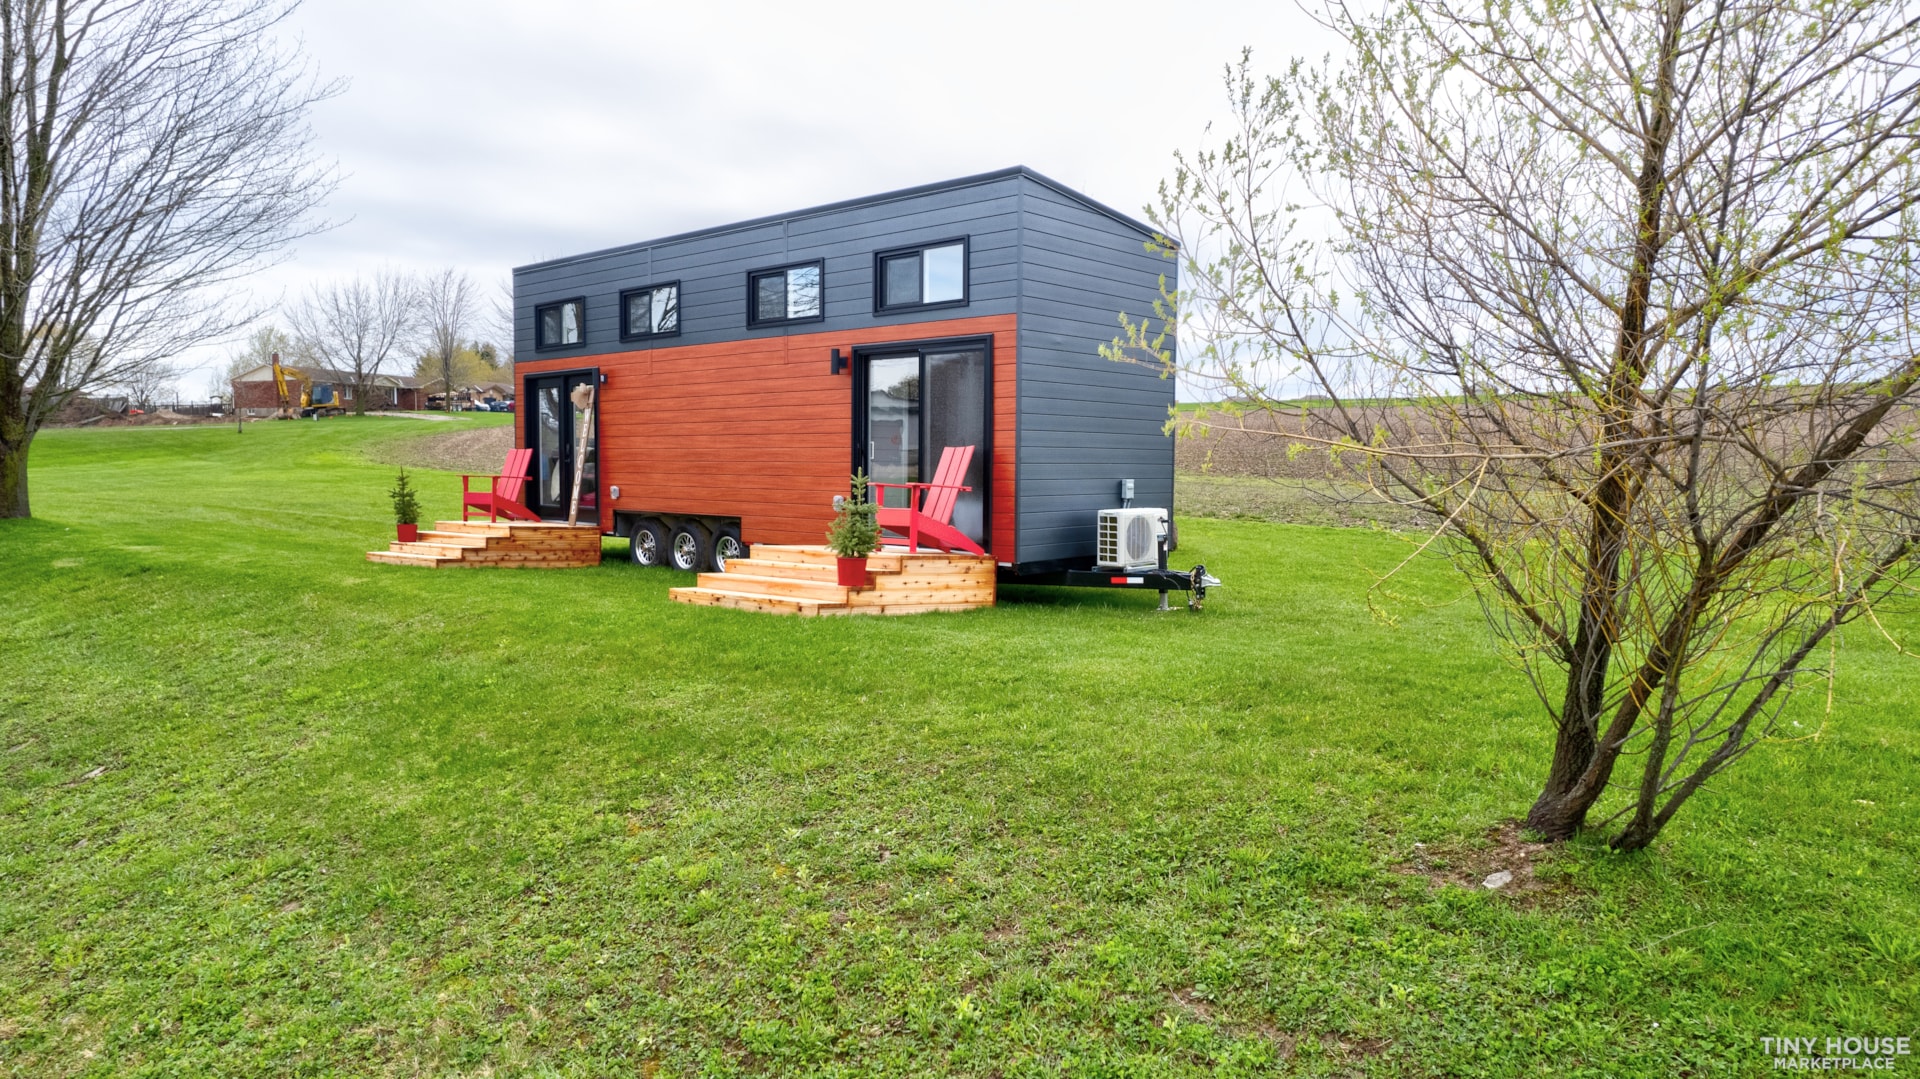 This Gorgeous Tiny Home On Wheels Boasts Two Small Decks And Plenty Of Modern Conveniences 217387 1 